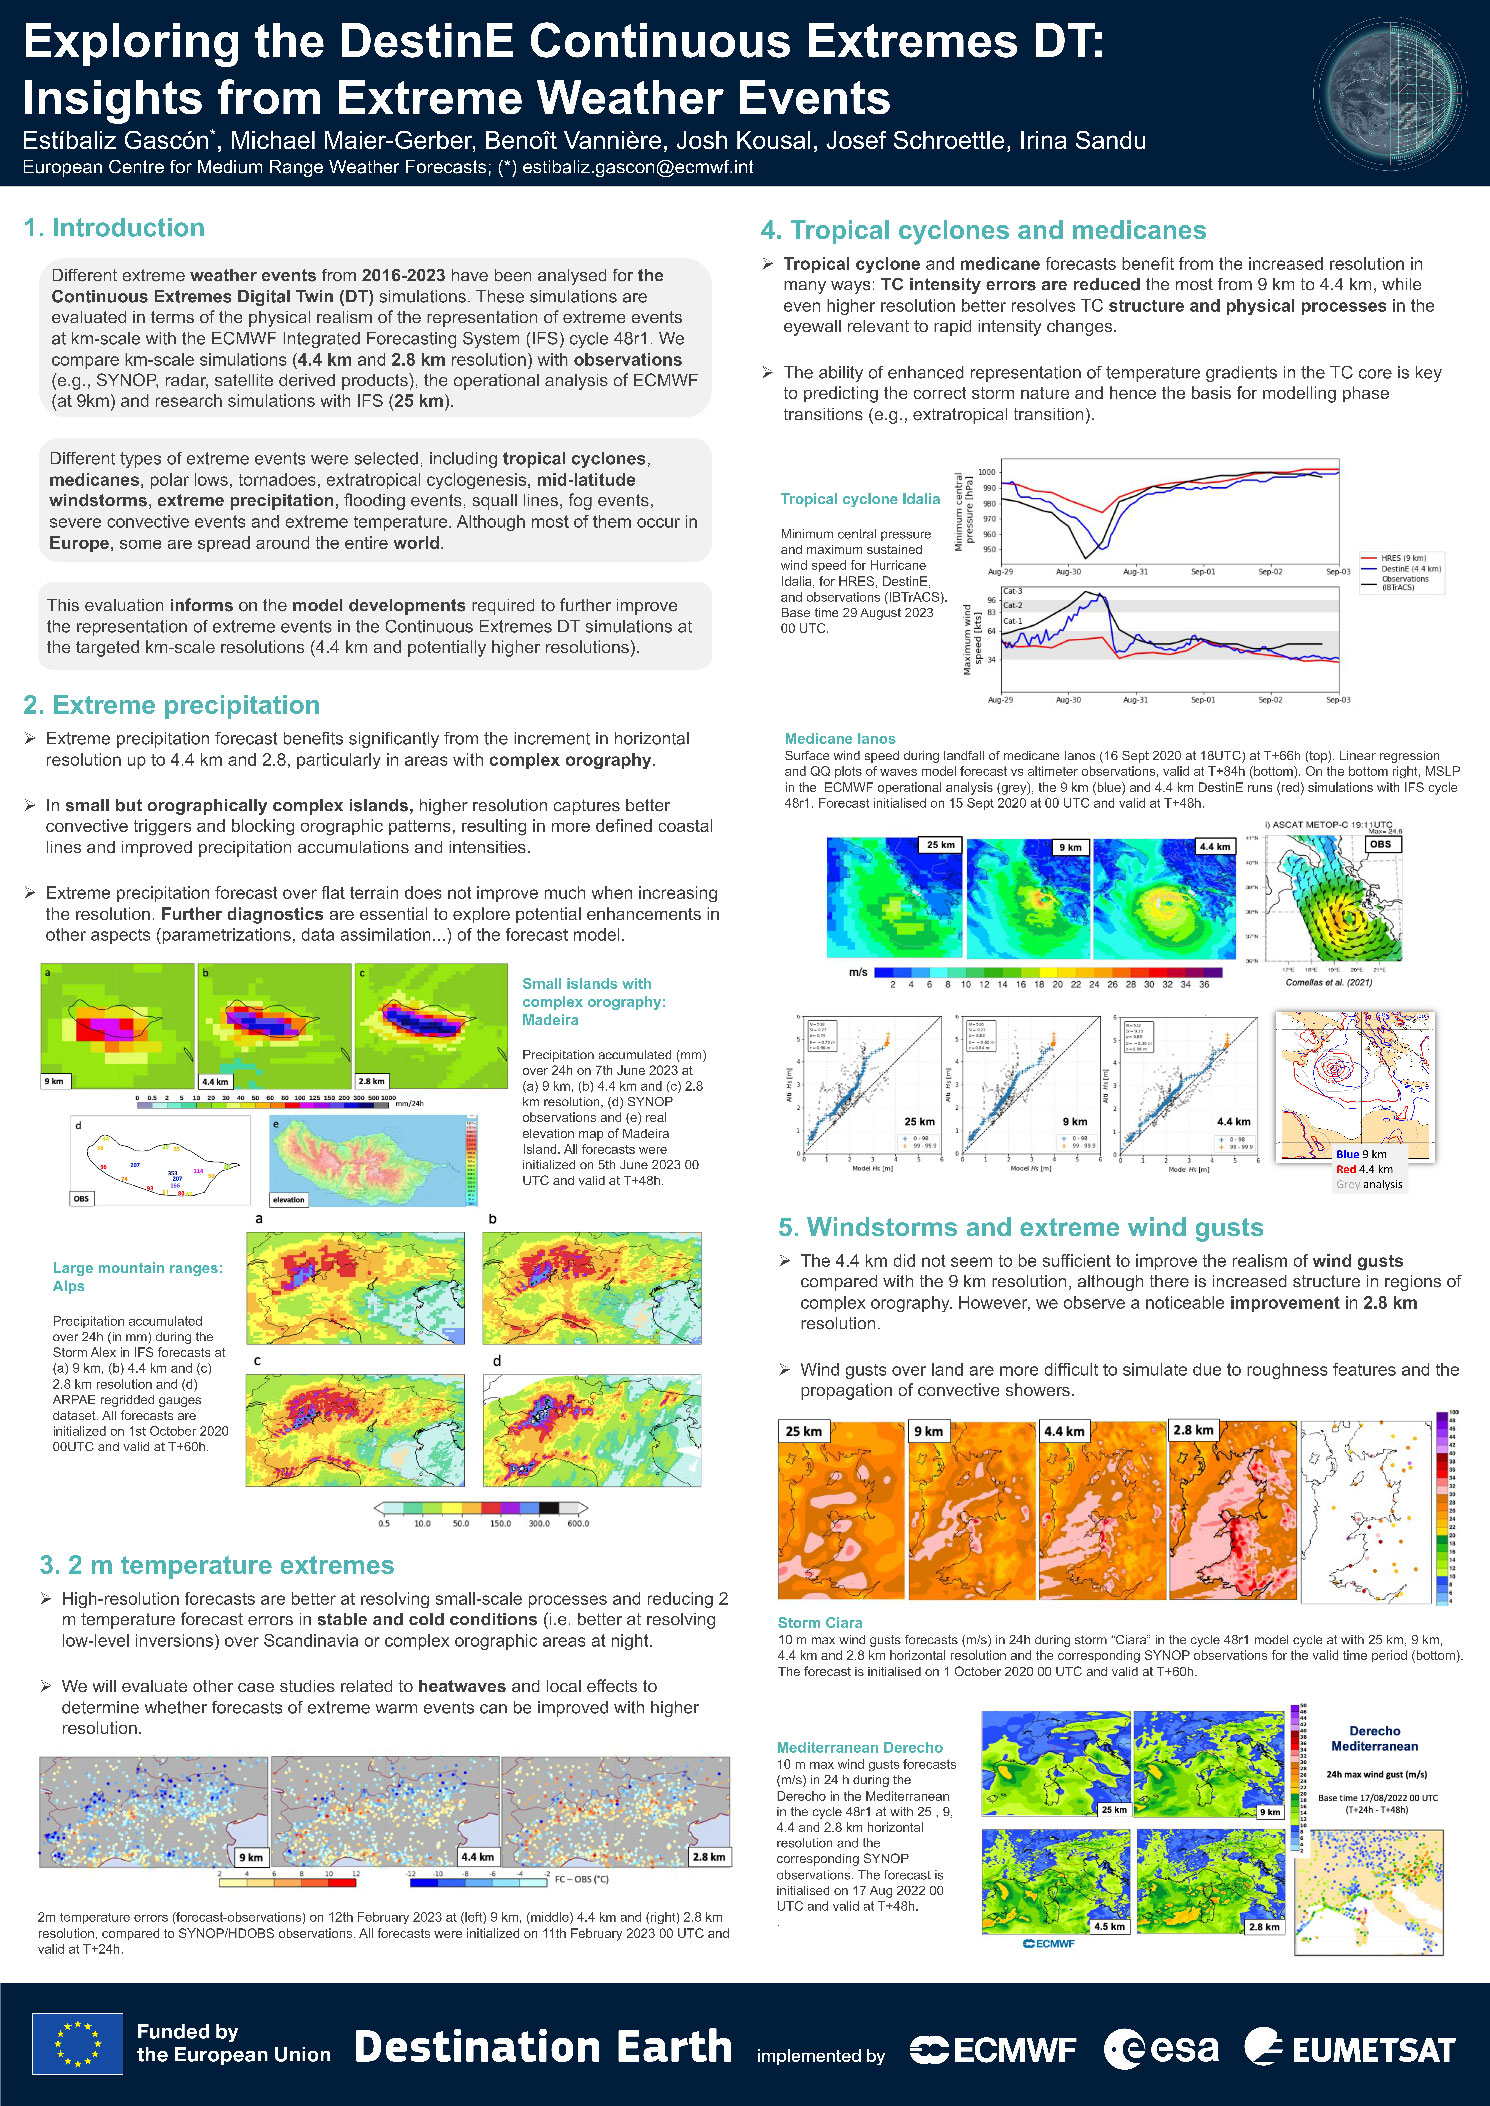 Exploring the DestinE Continuous Extremes DT insights from extreme weather events